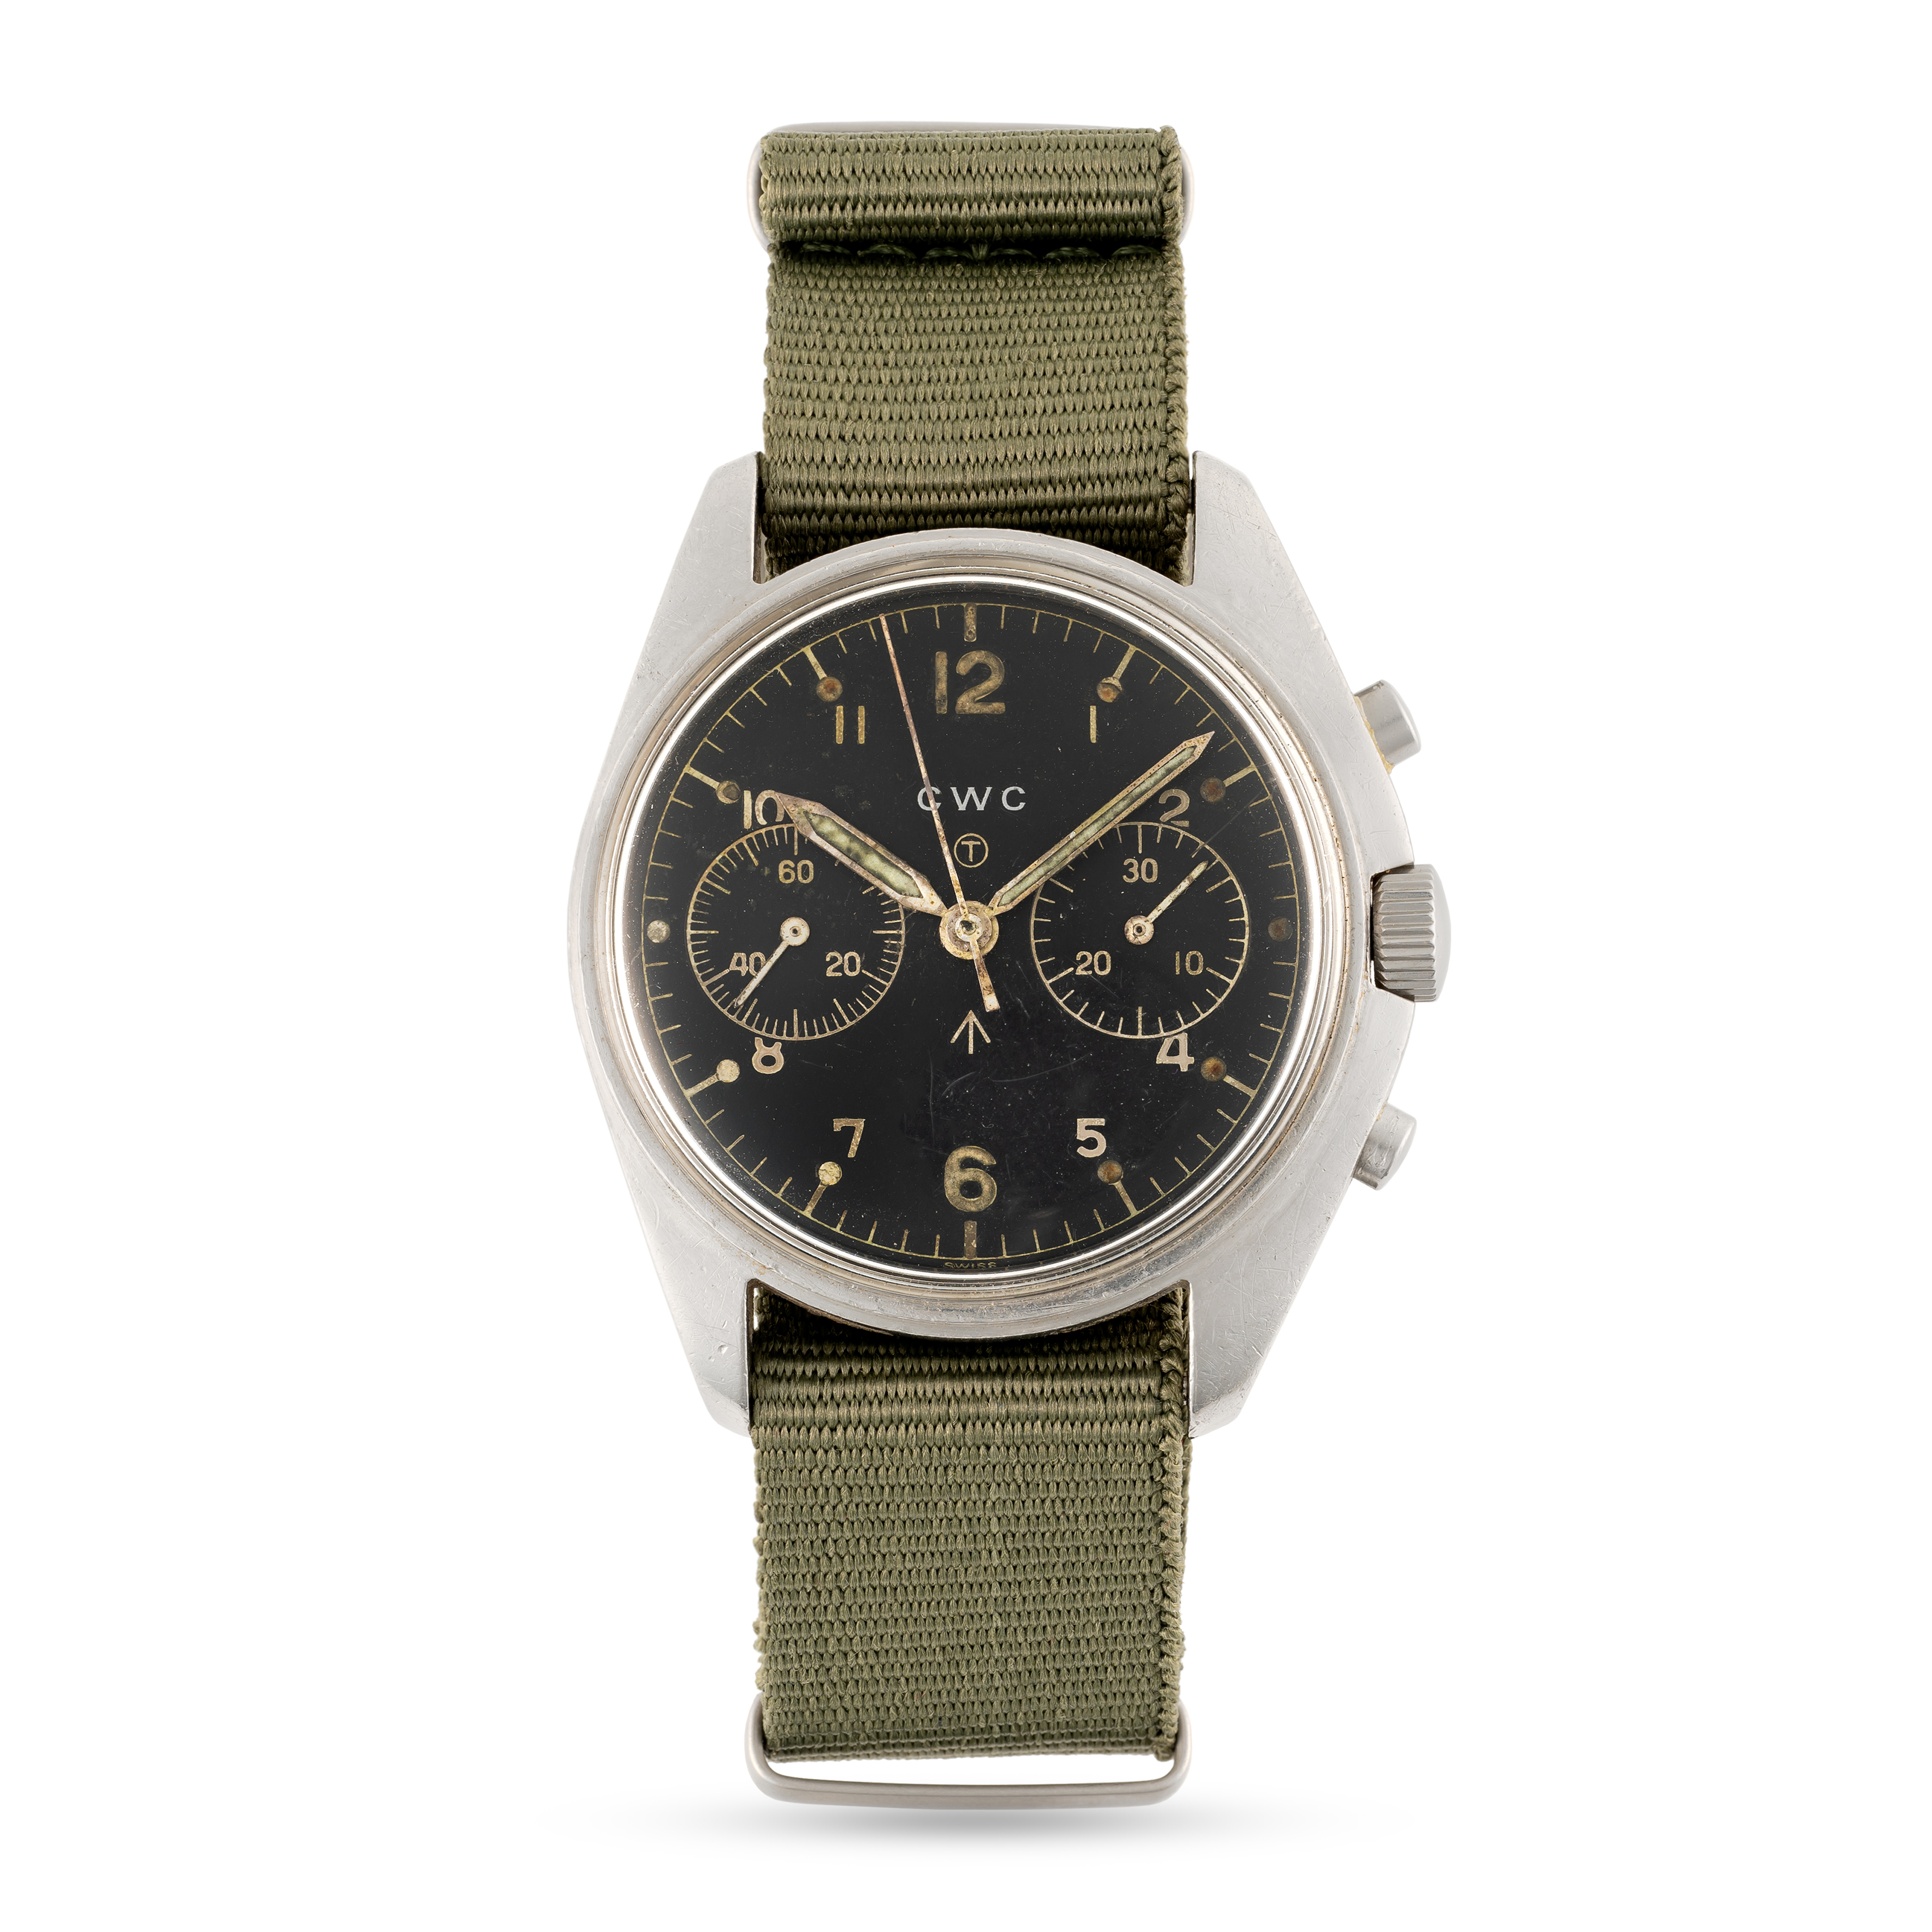 A GENTLEMAN'S STAINLESS STEEL BRITISH MILITARY CWC ROYAL NAVY PILOTS CHRONOGRAPH WRIST WATCH DATED - Image 2 of 7